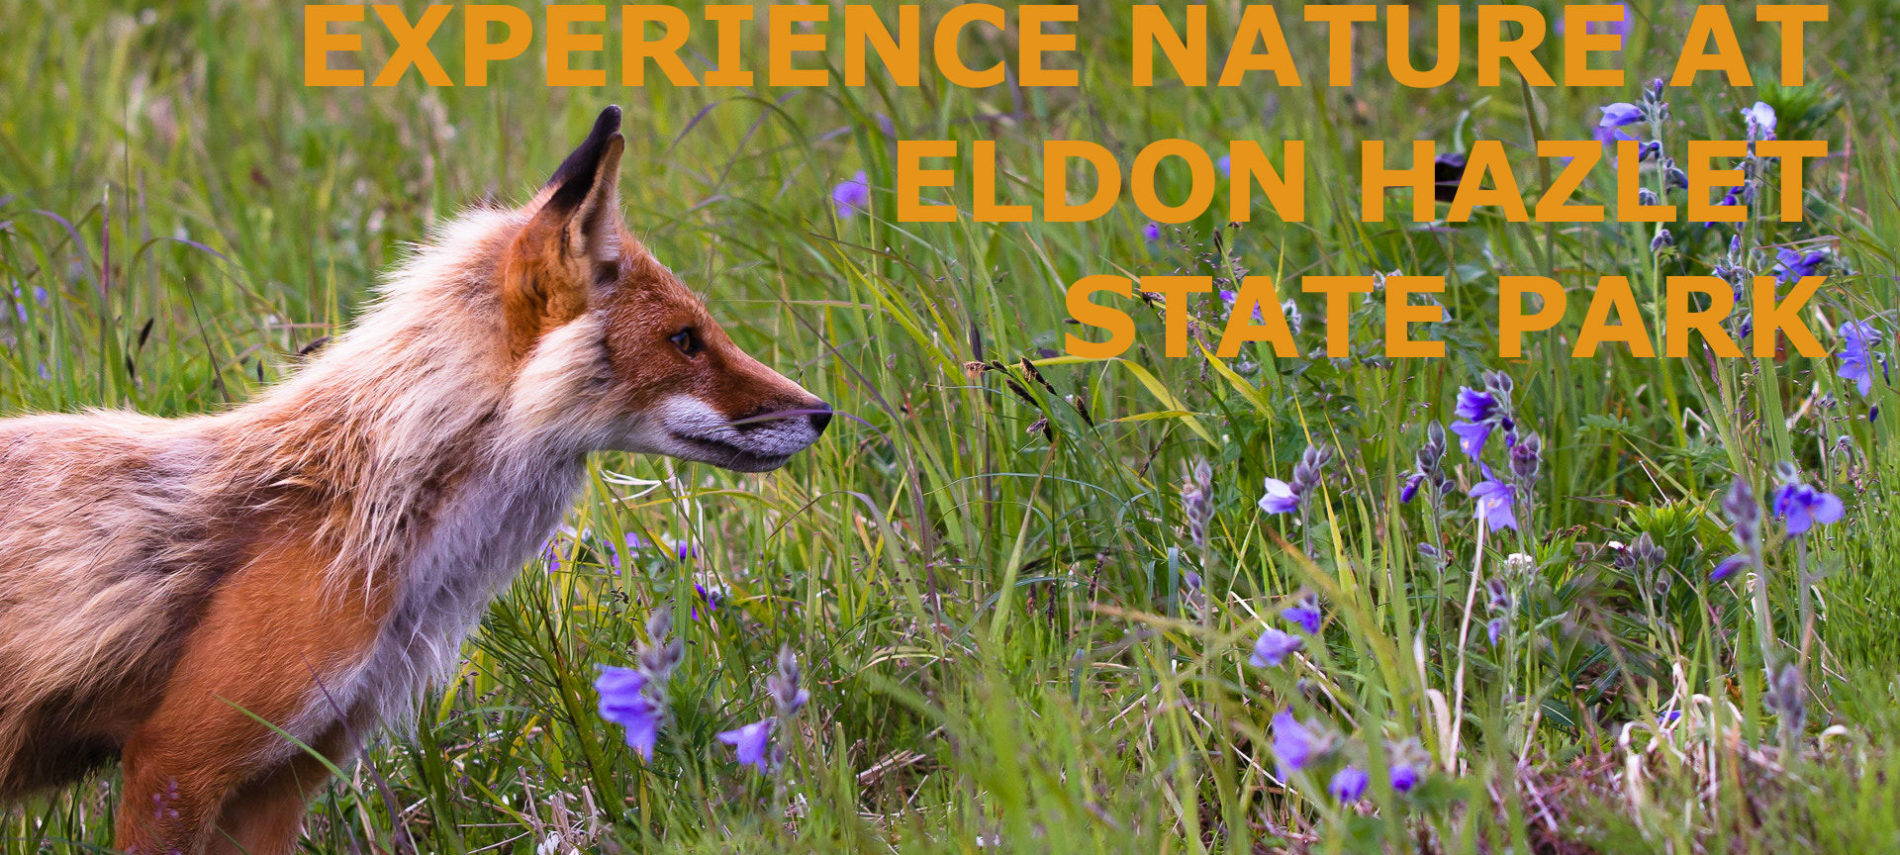 A red fox standing in a field of wildflowers. Title: Experience Nature At Eldon Hazlet State Park.